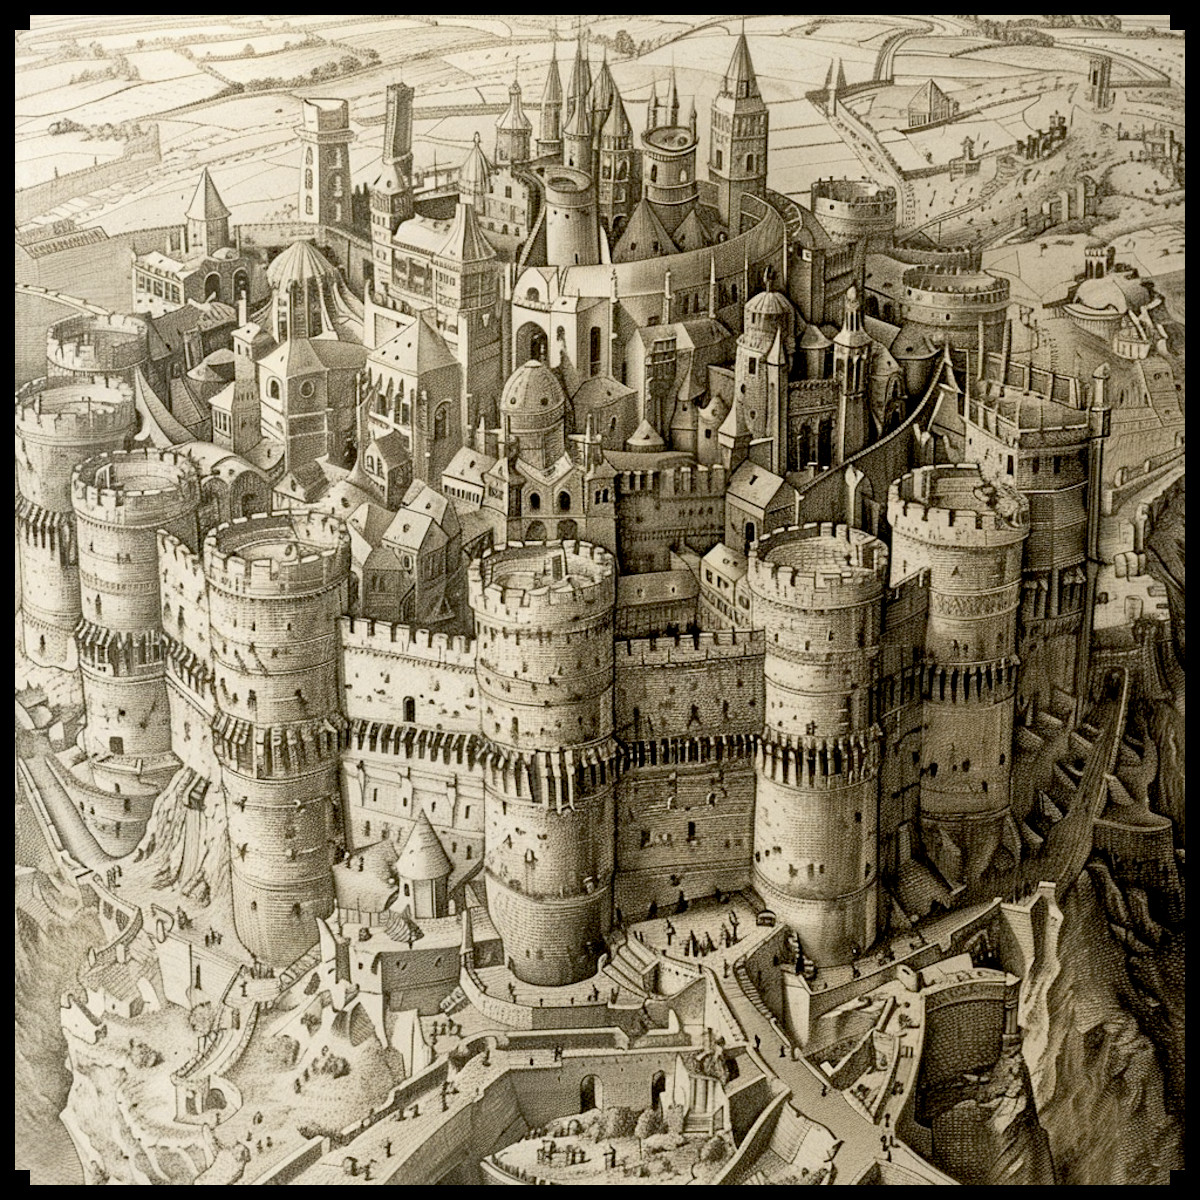 wonders and cities, fantasy map symbols, cartography assets and wonderdraft assets, fantasy medieval megastructures